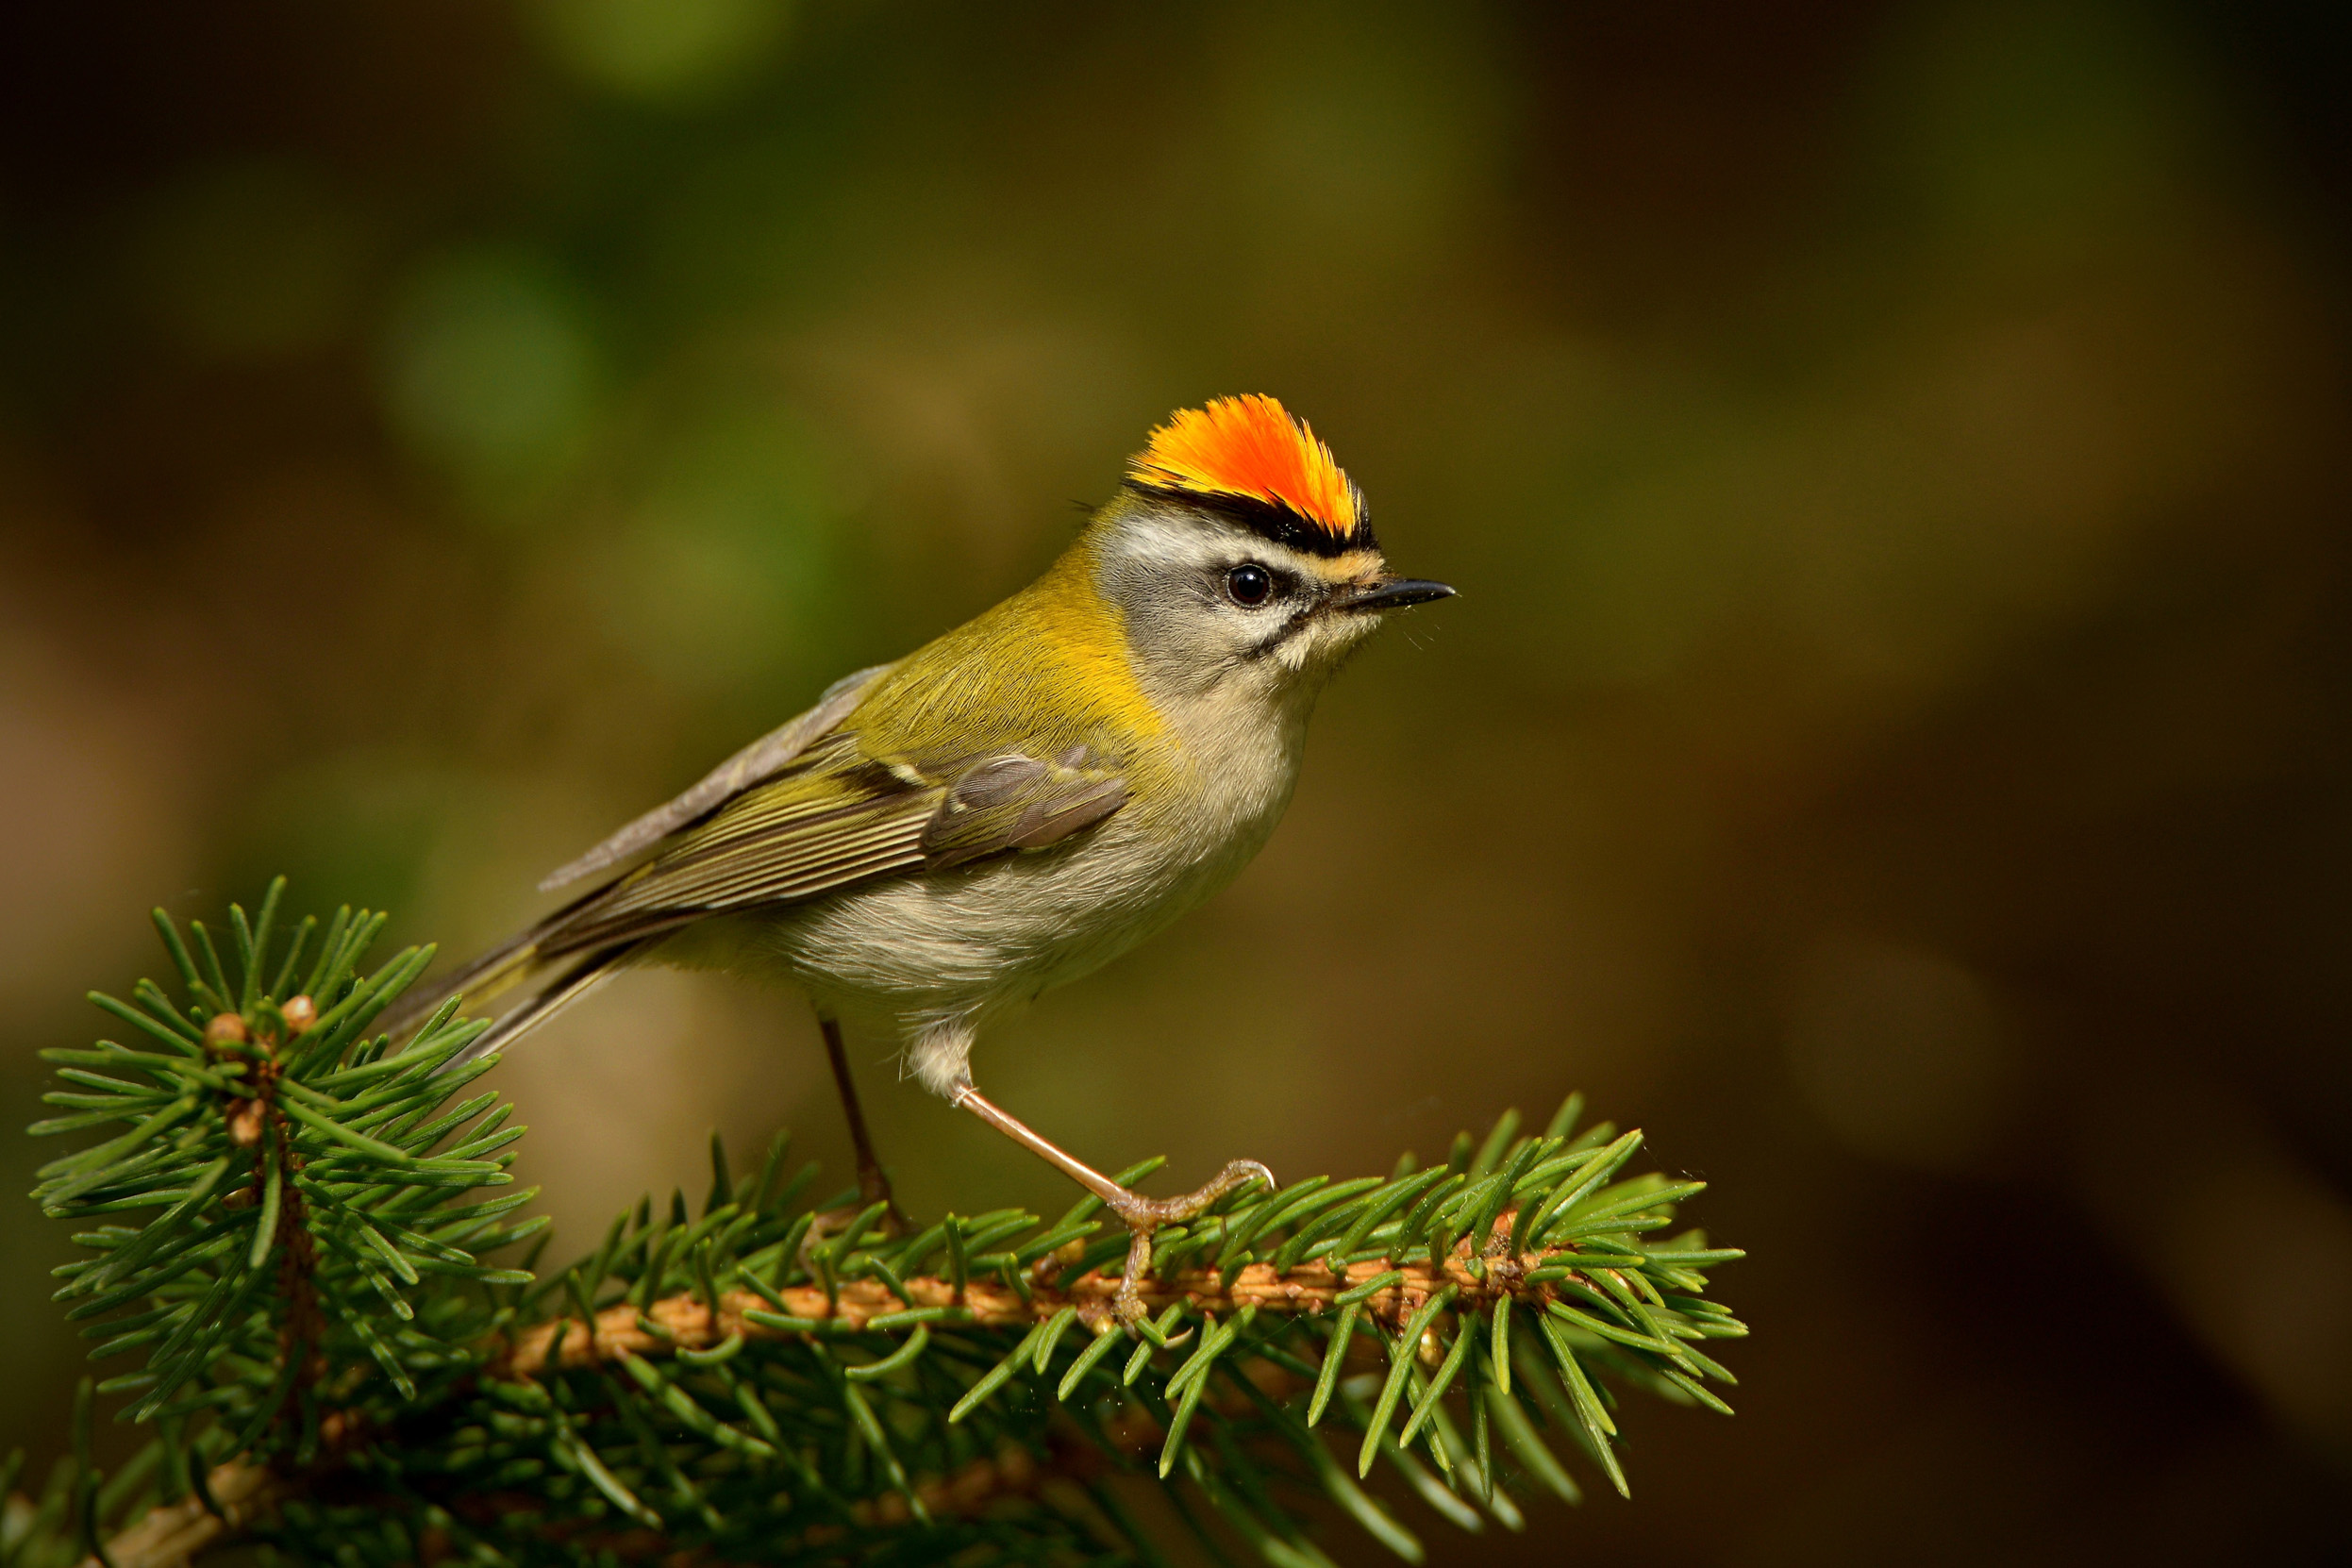 A male Firecrest perched on a pine needle branch.